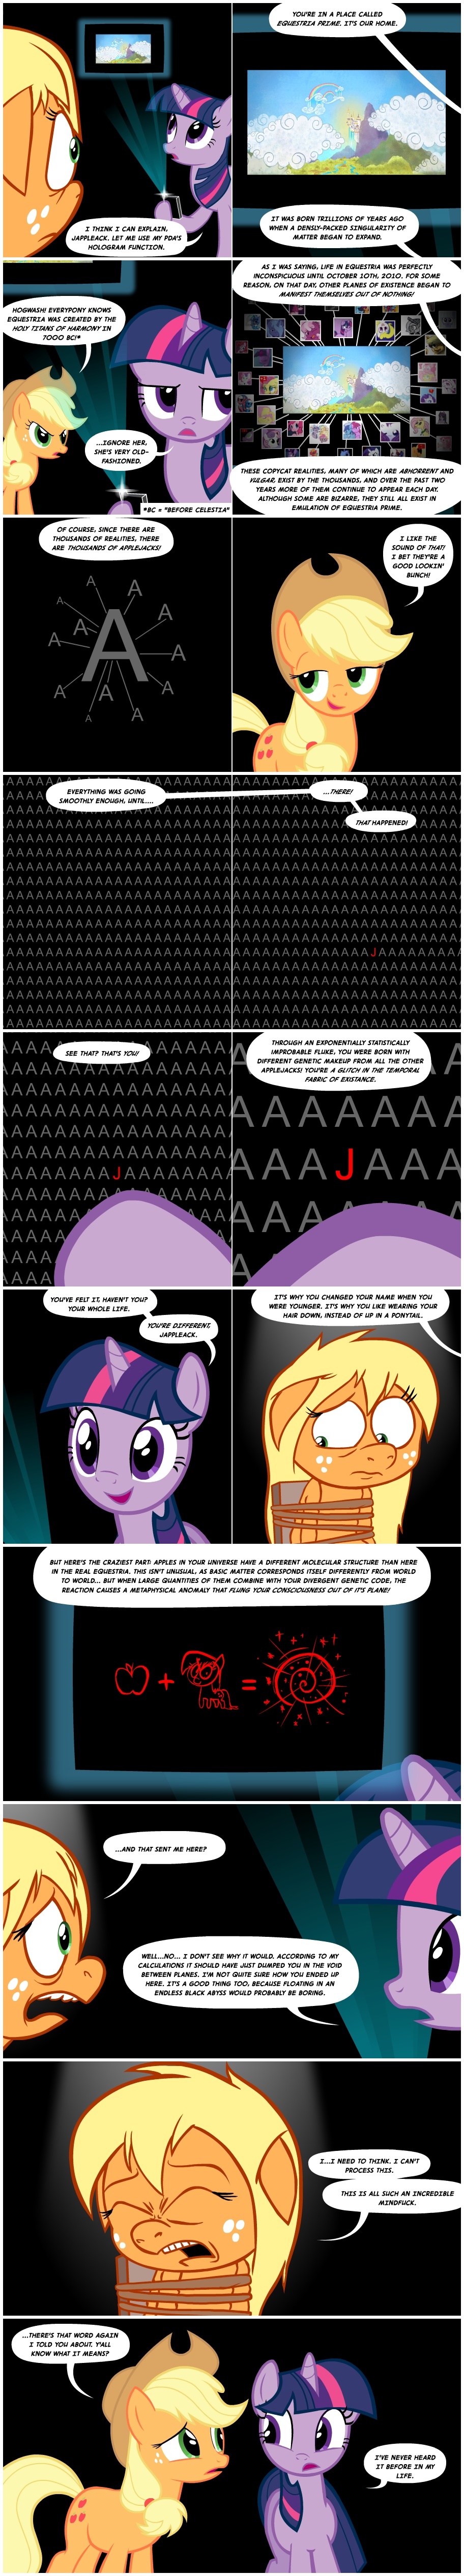 apple applejack_(mlp) ask_berry_punch ask_flutterfuckershy ask_fluttershy_and_pinkie_pie ask_jappleack ask_mcblobs ask_molestia ask_pinkie_pie ask_pinkie_pie_solutions ask_smarty_belle ask_stoned_trixie ask_surprise ask_sweetiepoo ask_twilight ask_twilightsparklelovessex big_macintosh_(mlp) blonde_hair bound canterlot celestia_(mlp) chair cheerilee_(mlp) cloud clouds comic dialog english english_text equestria equine female feral flutterfuckershy fluttershy_(mlp) food friendship_is_magic fruit glitchy_hooves_responds green_eyes hair hat hologram horn horse hotdiggedydemon loona loonadventure lotus_(mlp) luna_(mlp) male mammal mcblob mcblobs mindfuck moonstuck mountain multiverse my_little_pony naughty_luna naughty_naughty_luna naughty_side_of_the_moon nigel_thornberry oh_dat_cheerilee open_mouth pda pinkie_pie_(mlp) pinkie_pie_answers pony princess princess_celestia_(mlp) princess_luna_(mlp) purple_eyes rainbow rarity_(mlp) river rope royalty science smarty_belle speech_bubbles spike_(mlp) spike_replies square_crossover stoned_trixie surprise_(mlp) sweetie_belle_(mlp) sweetiepoo teeth text tongue tooth trixie_(mlp) tumblr twilight_sparkle_(mlp) twilight_sparkle_(mlp)woona two_tone_hair what what_has_science_done woonastuck